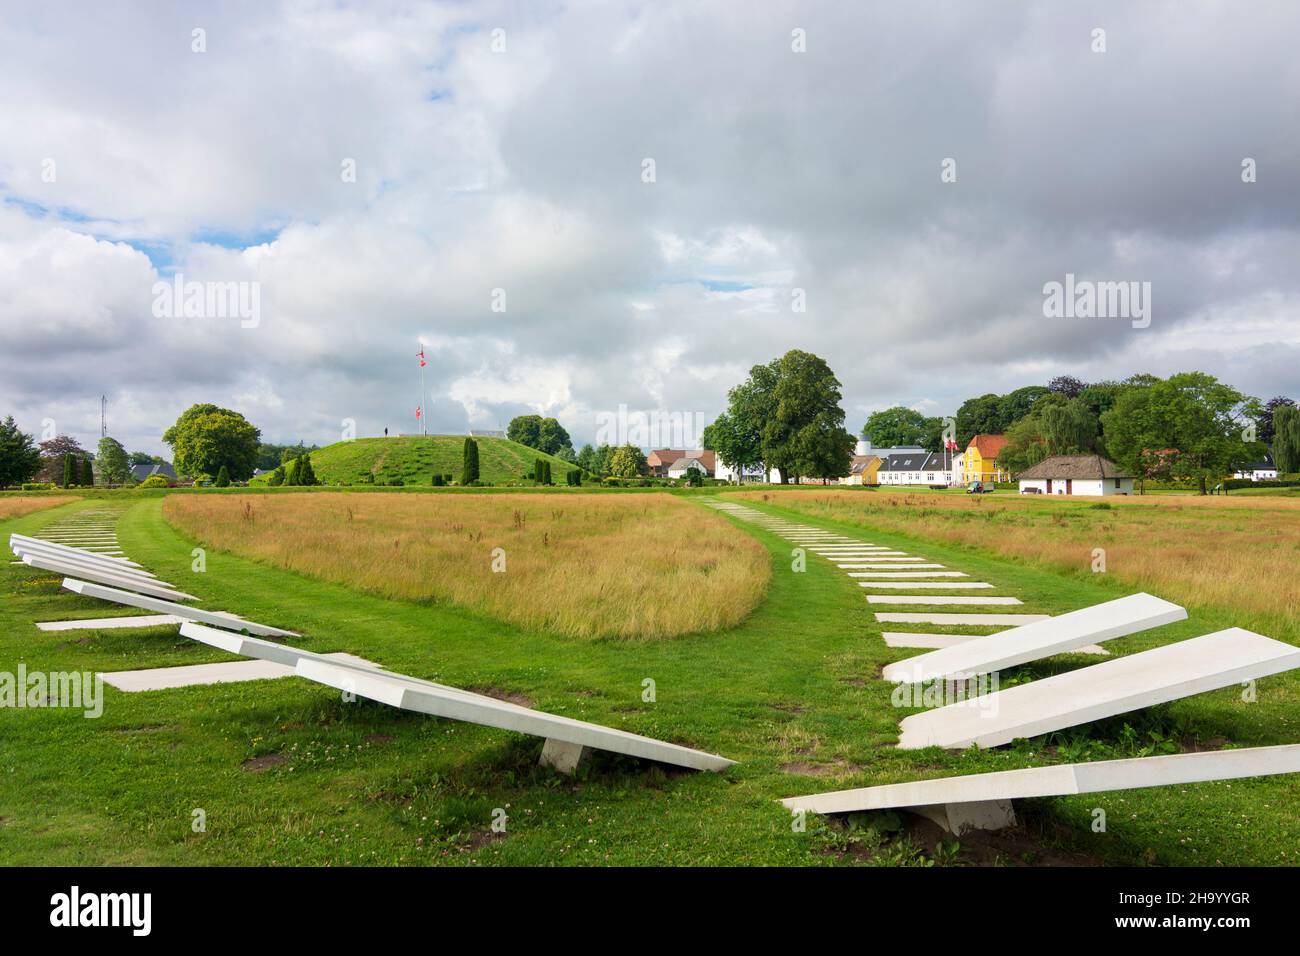 Vejle: white plates in the floor make the position of a ship's settlement visible, in Jelling, Jylland, Jutland, Denmark Stock Photo